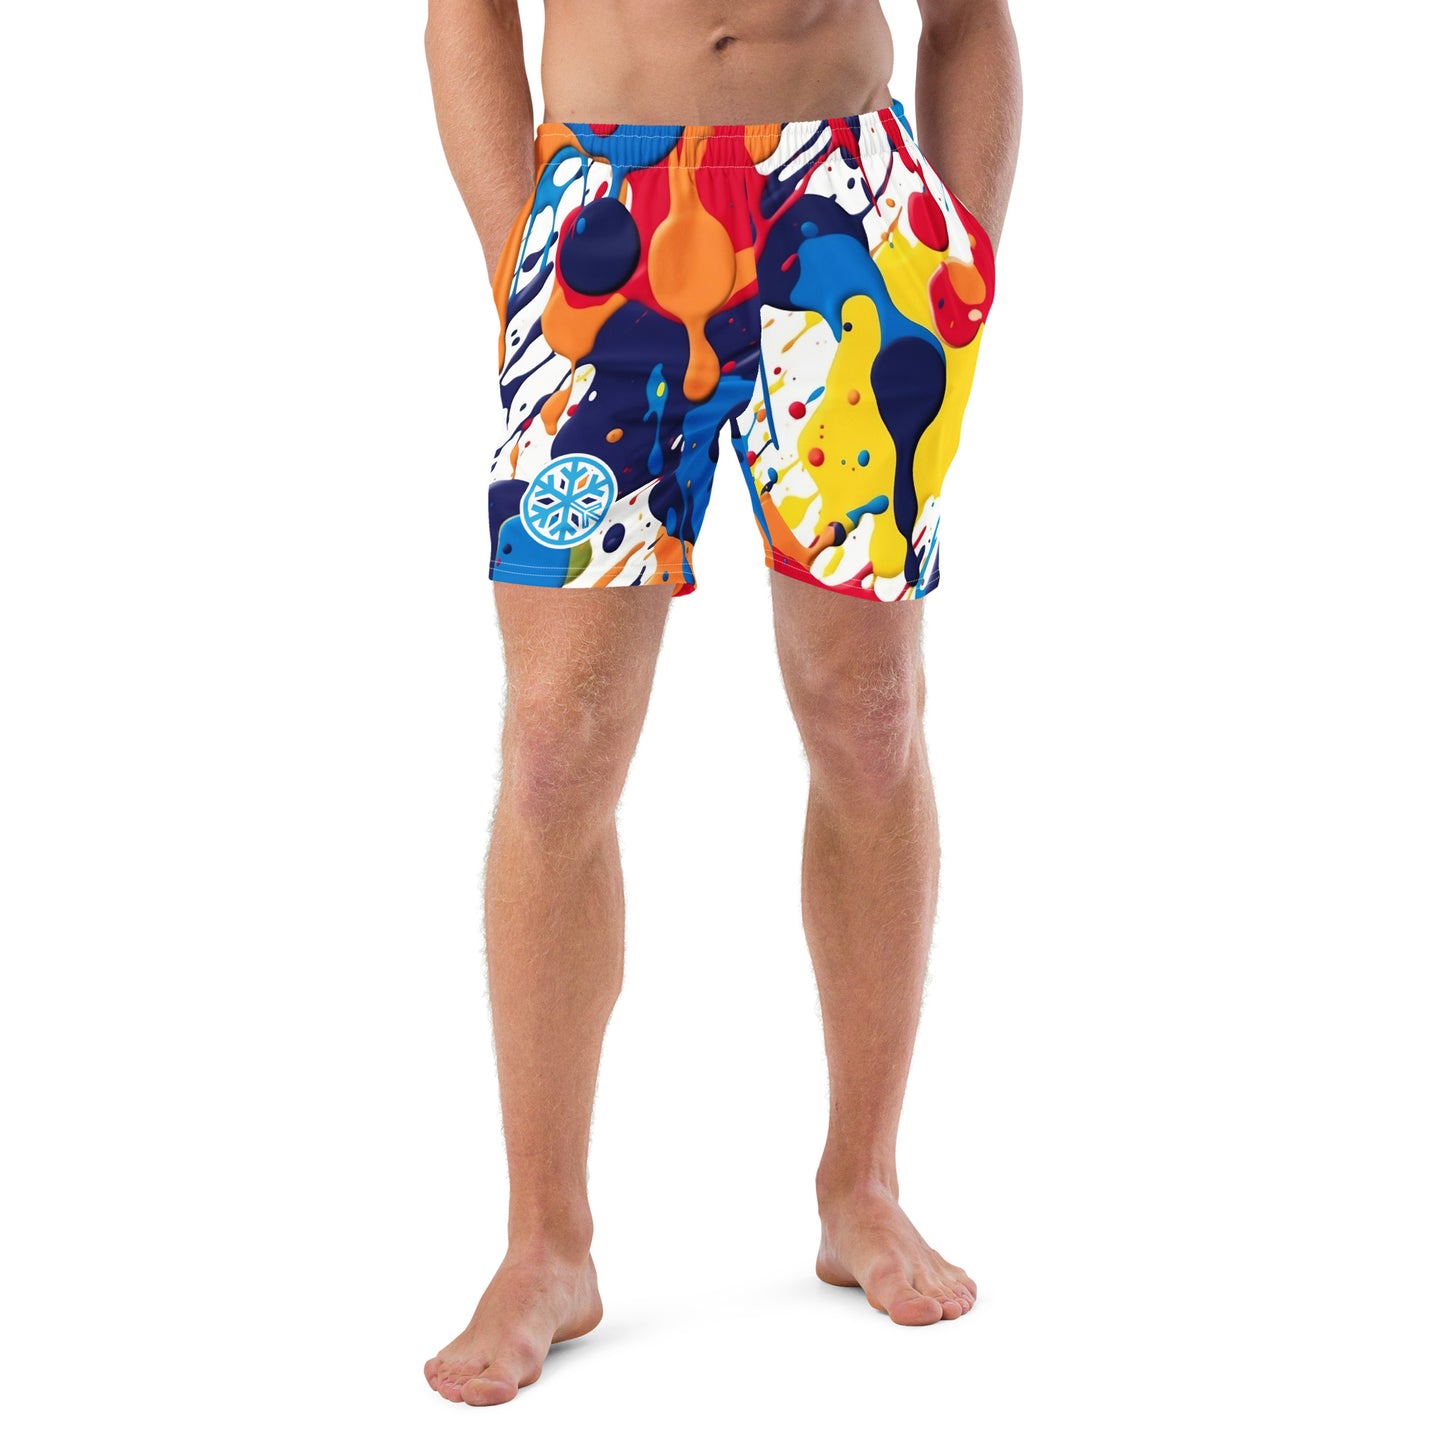 man front with paint splashes swim shorts by B.Different Clothing independent streetwear inspired by street art graffiti